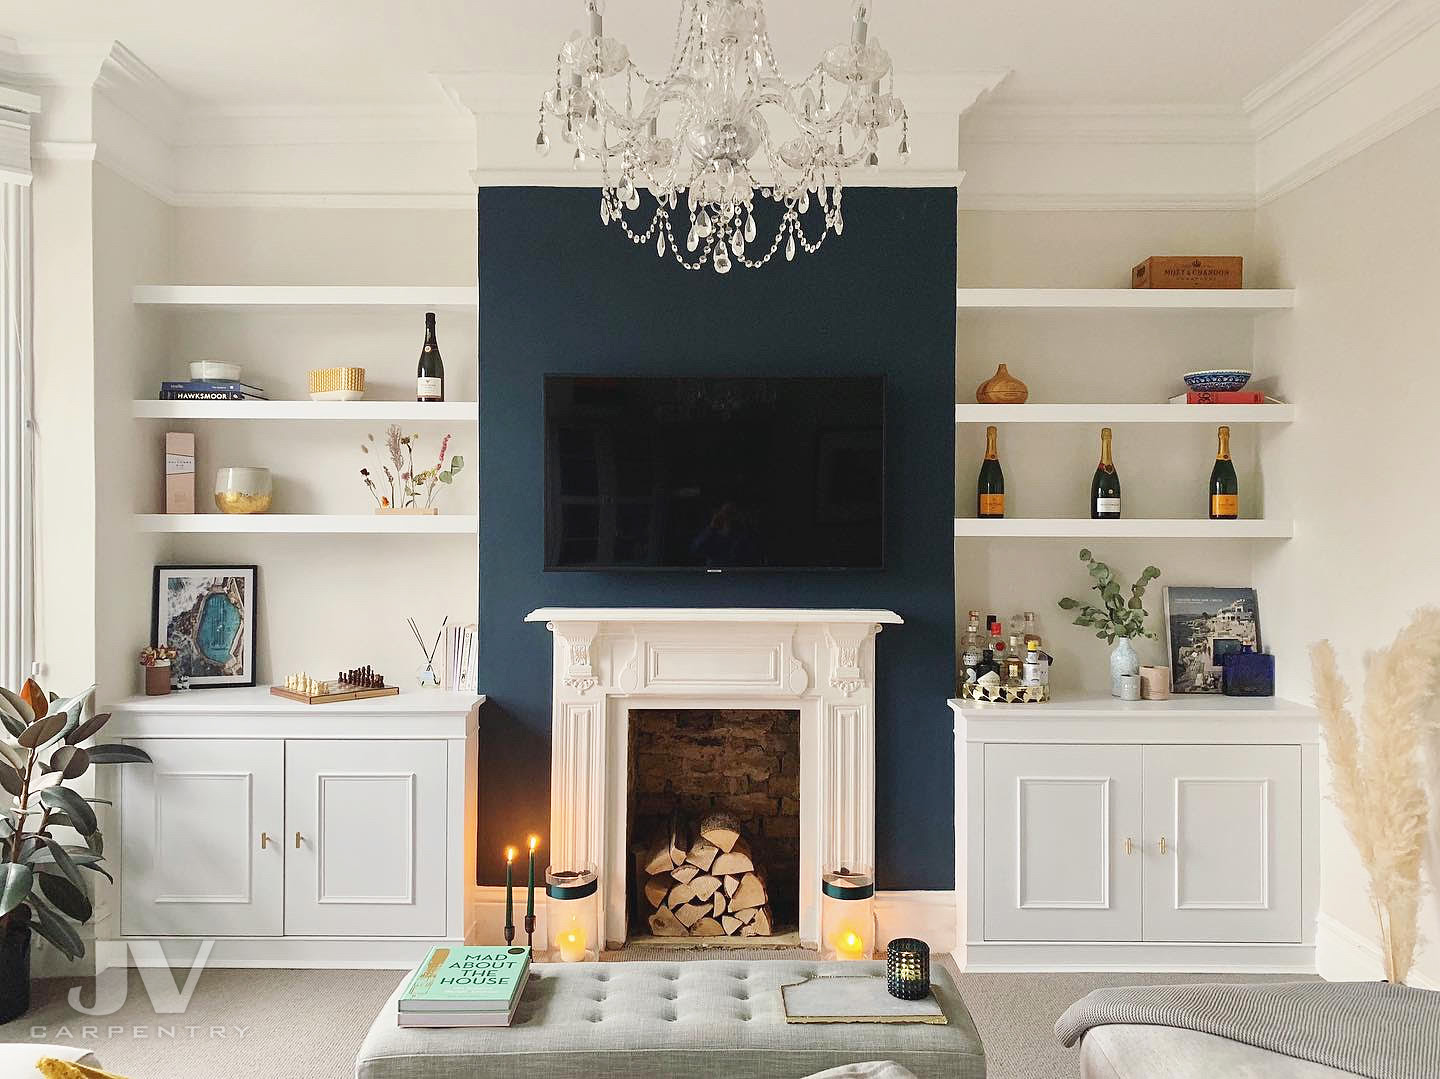 23 Alcove Shelving Ideas For Your, Dresser With Bookcases On Each Side